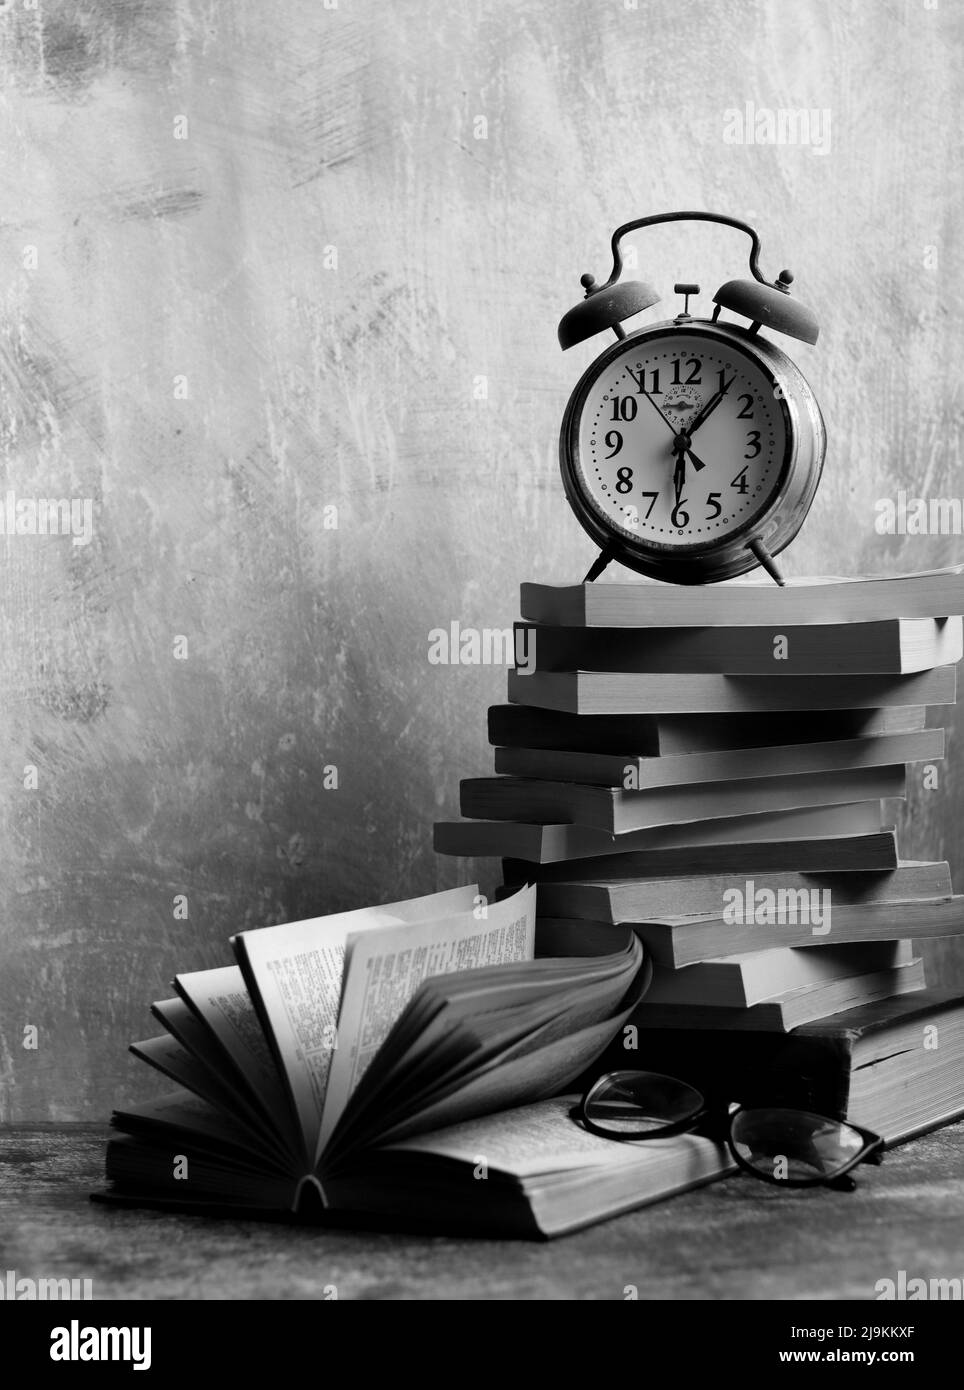 Stack of old books, vintage watch on a desk. Light grey textured background with copy space. Education concept. Stock Photo